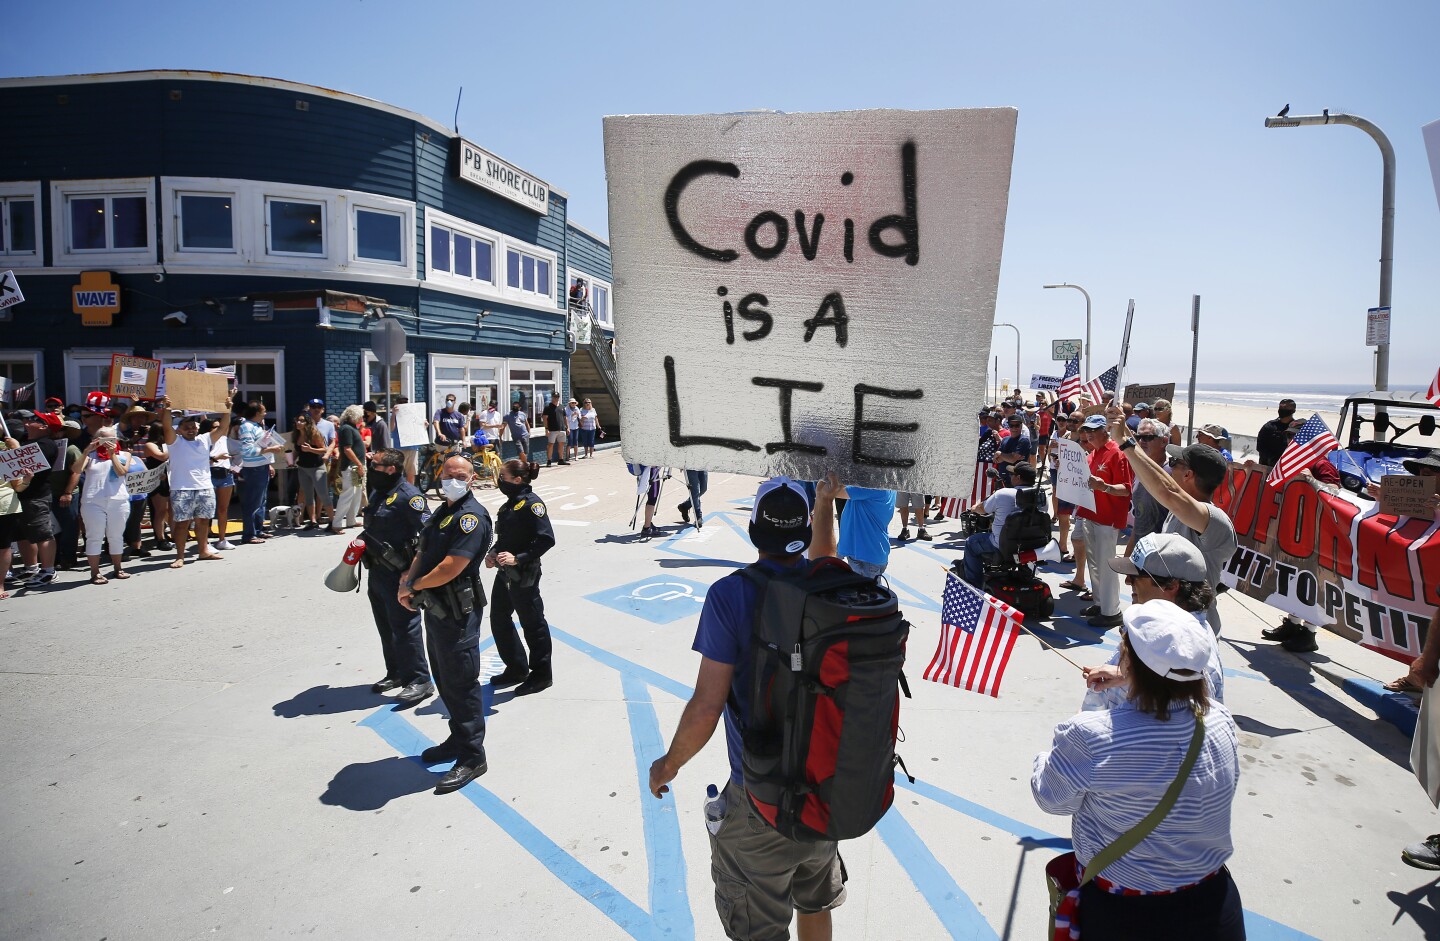 Protesters gather near the boardwalk in Pacific Beach during A Day of Liberty rally on Sunday, April 26, 2020. The protesters were against the government shutdown due to the coronavirus.